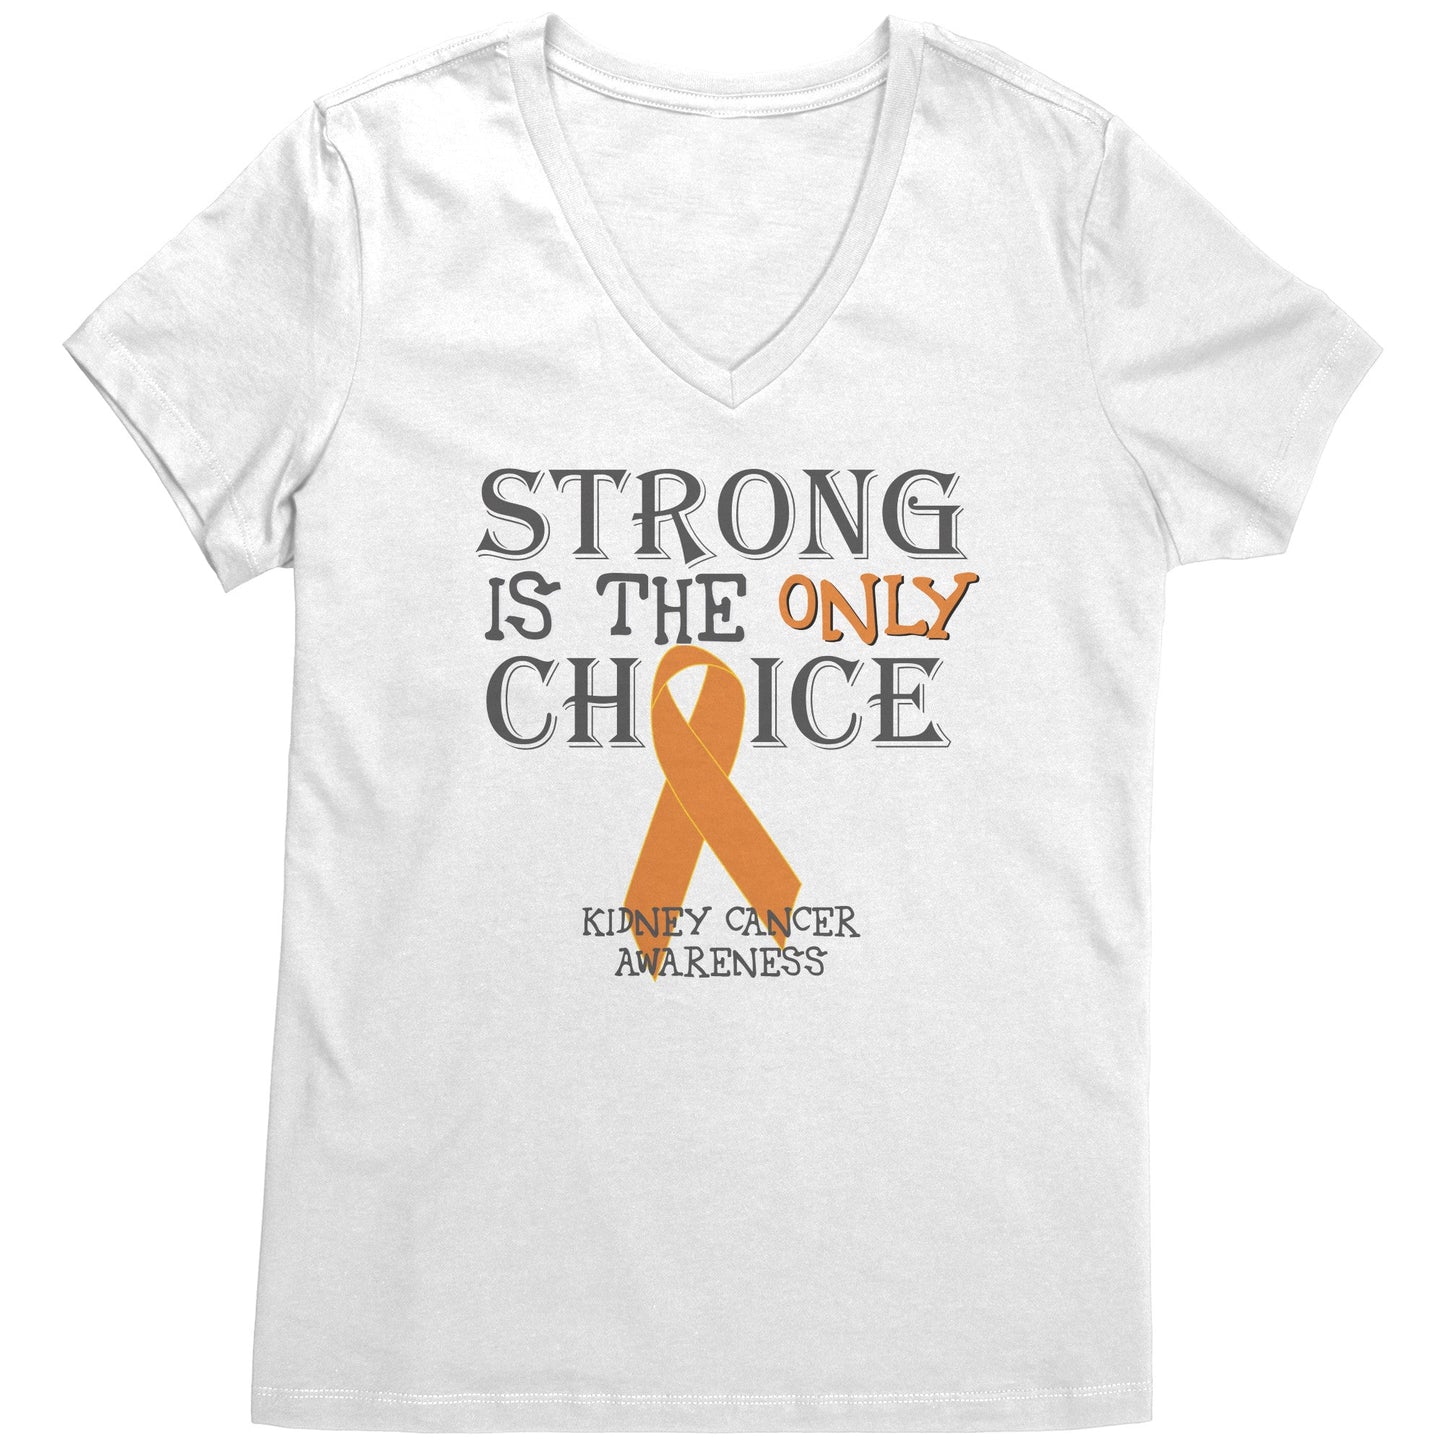 Strong is the Only Choice -Kidney Cancer Awareness T-Shirt, Hoodie, Tank |x|